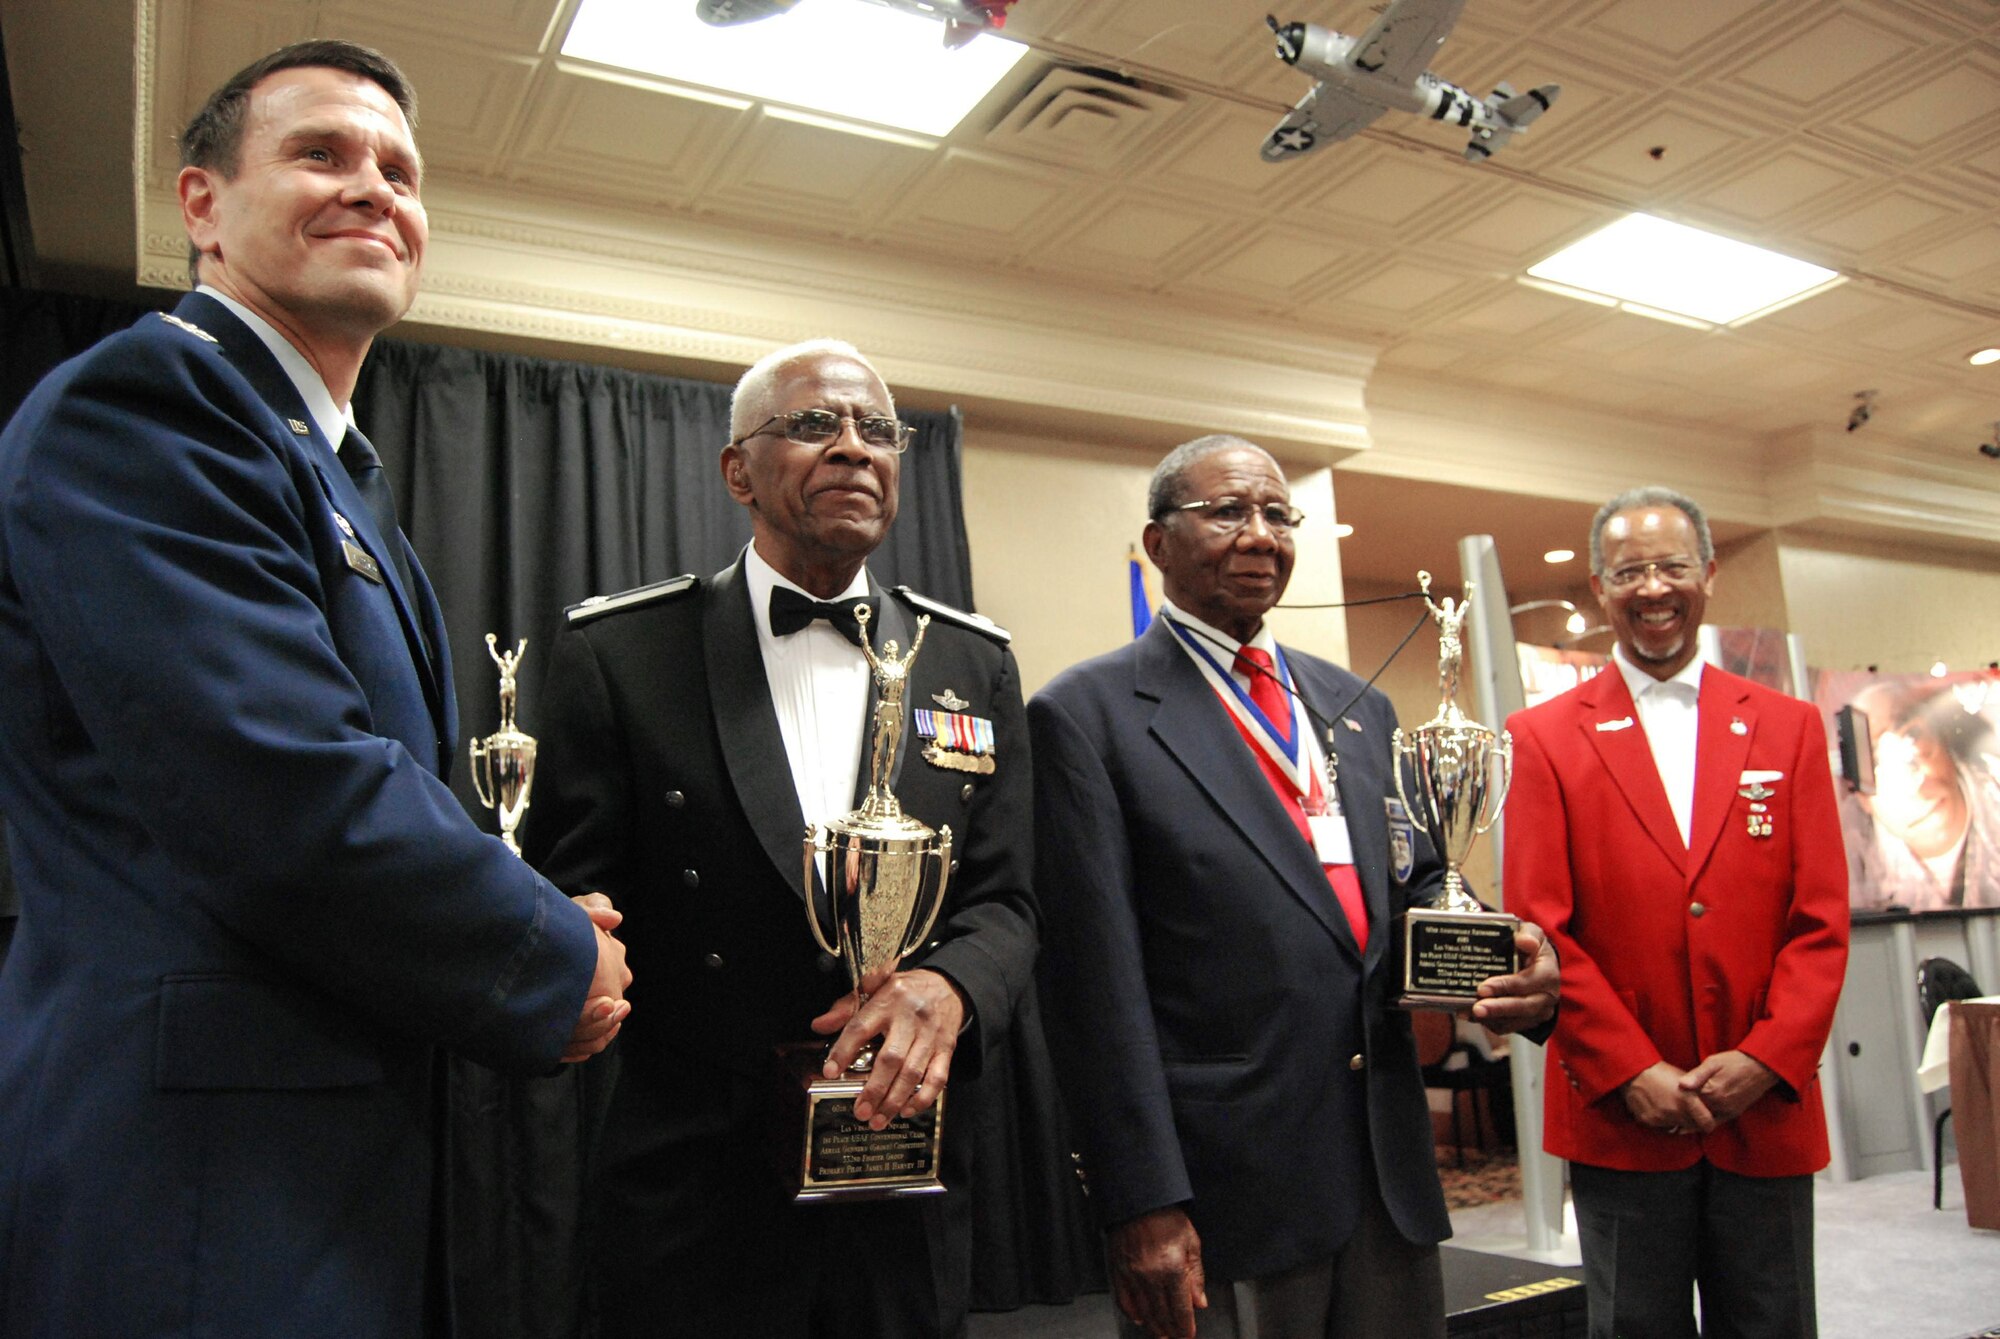 Lt. Col. James Harvey, won early weapons competition as Tuskegee Airman.